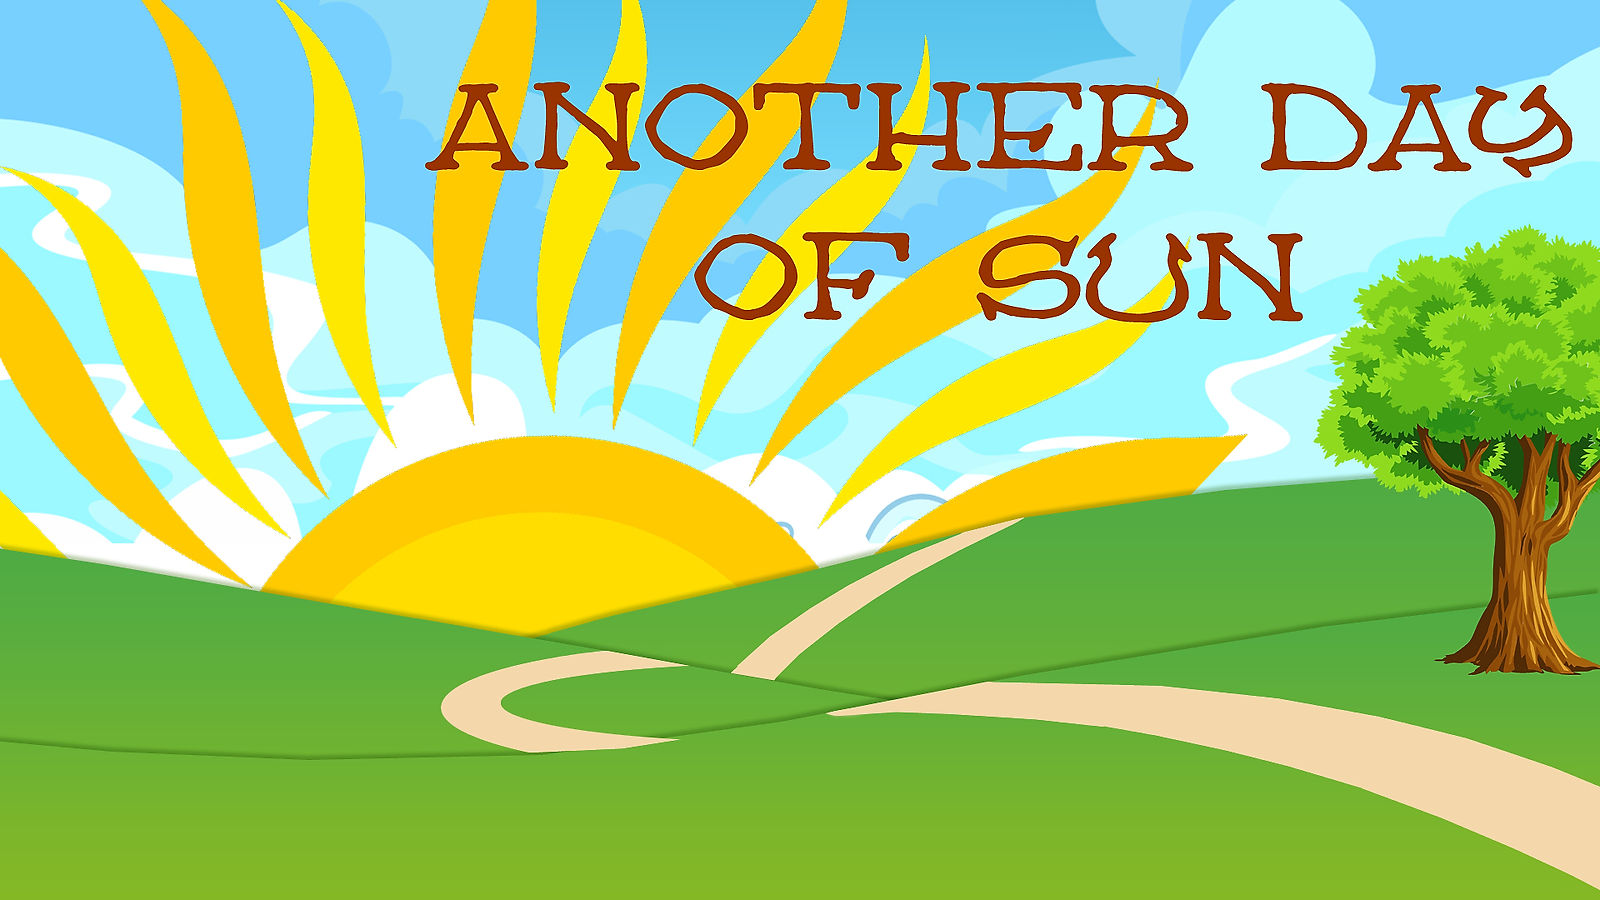 2020 OM Show: Another Day of Sun